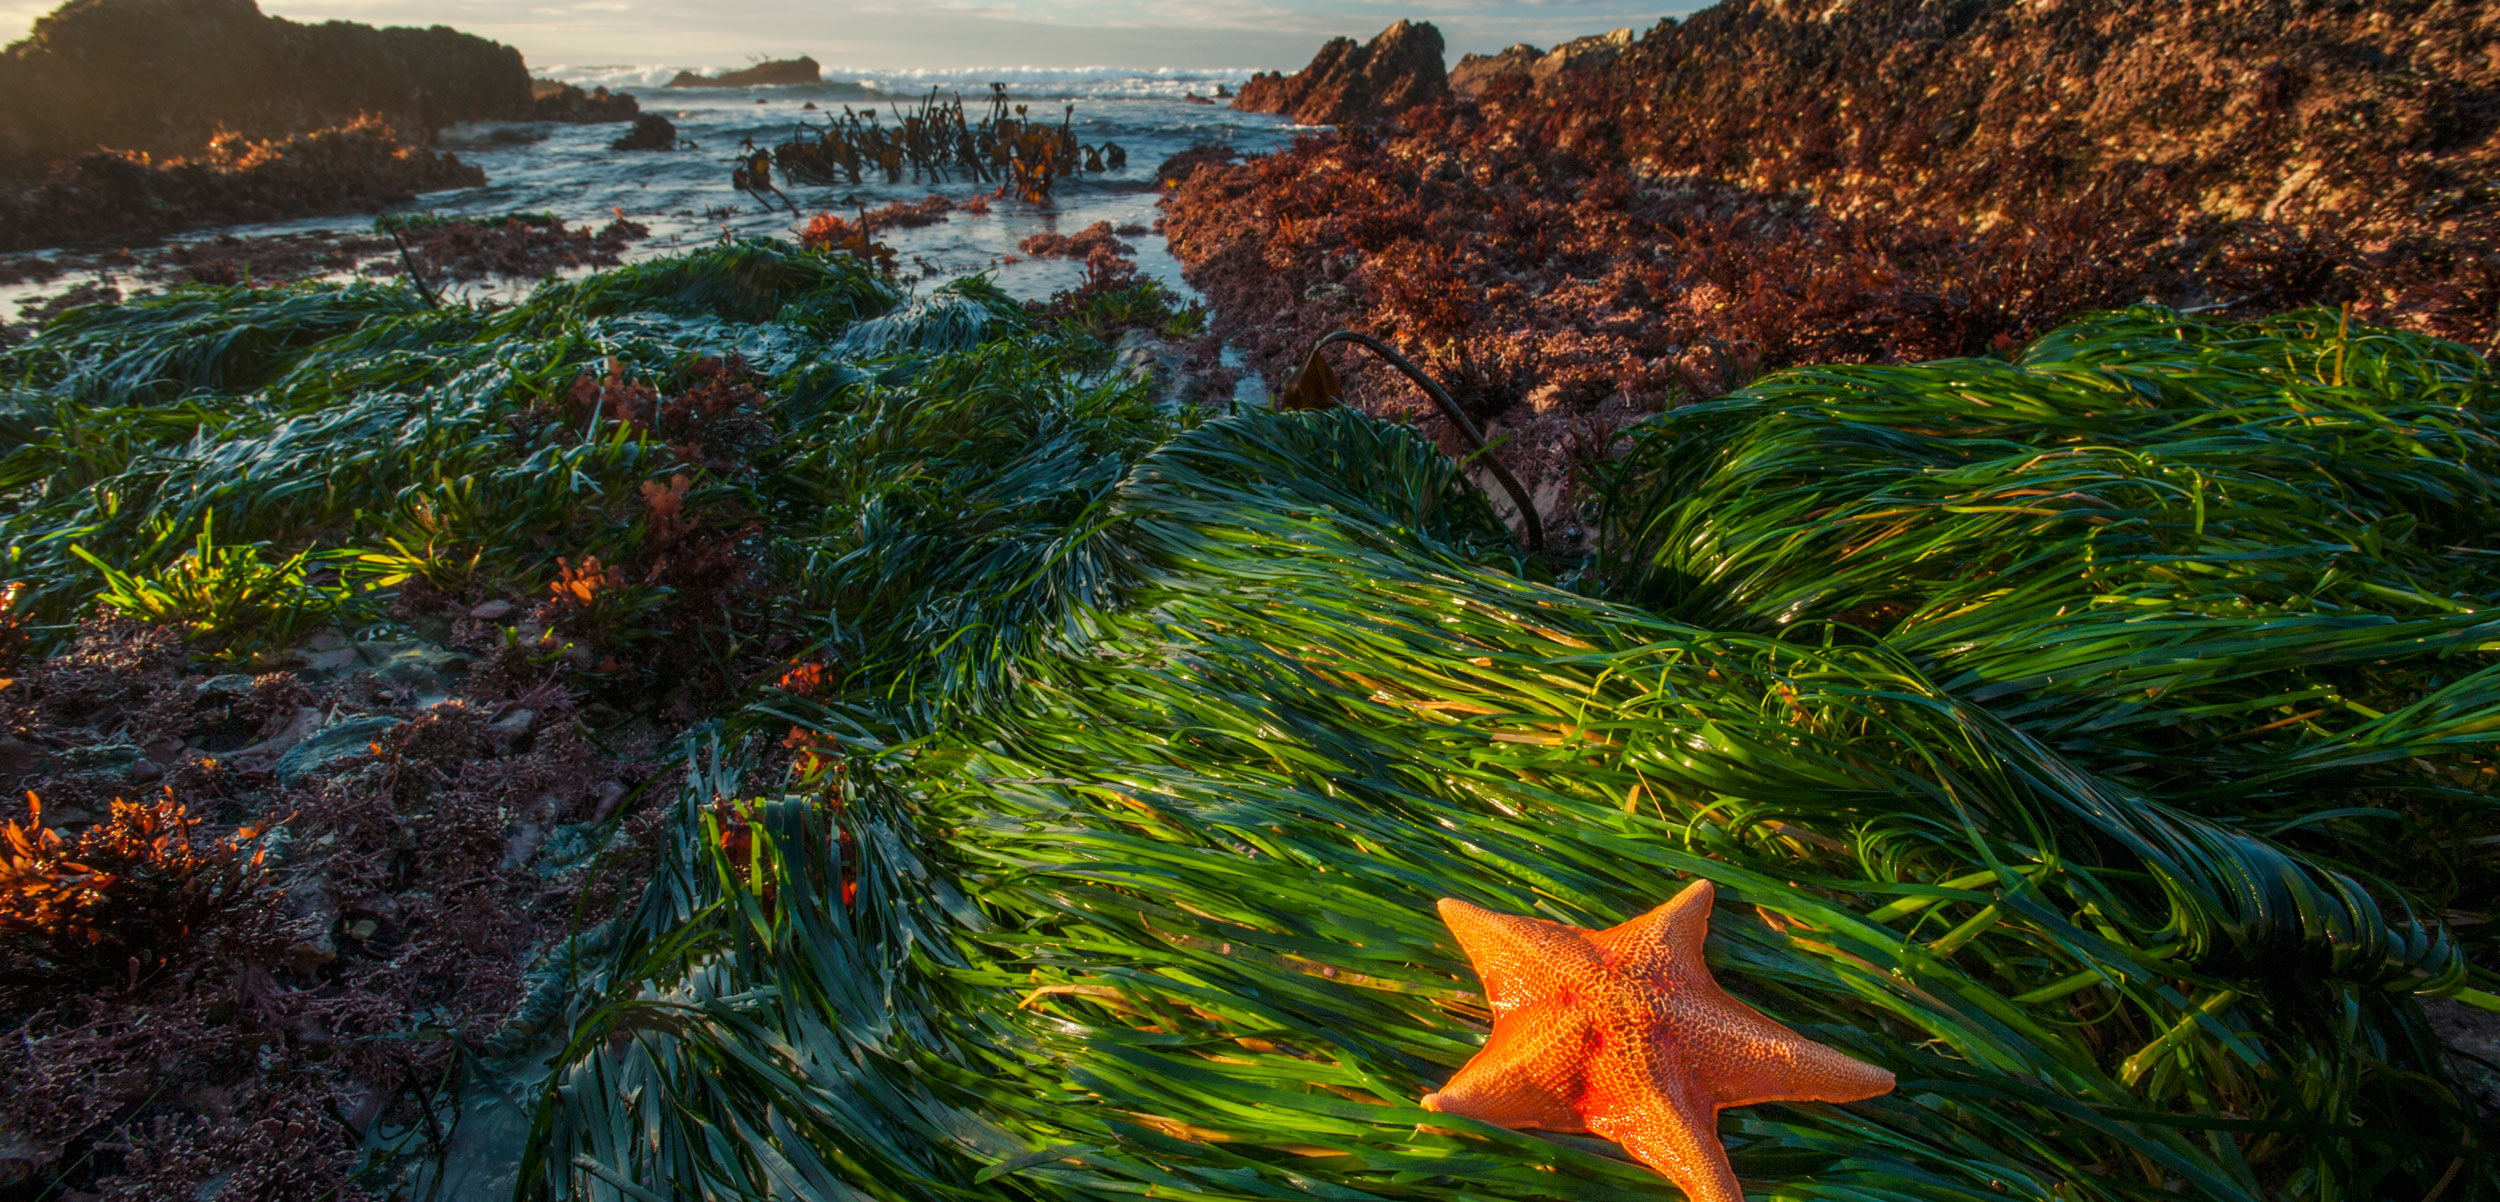 Seaweed and Seagrass Buffer the Acidity of the Nearby Ocean | Hakai ...